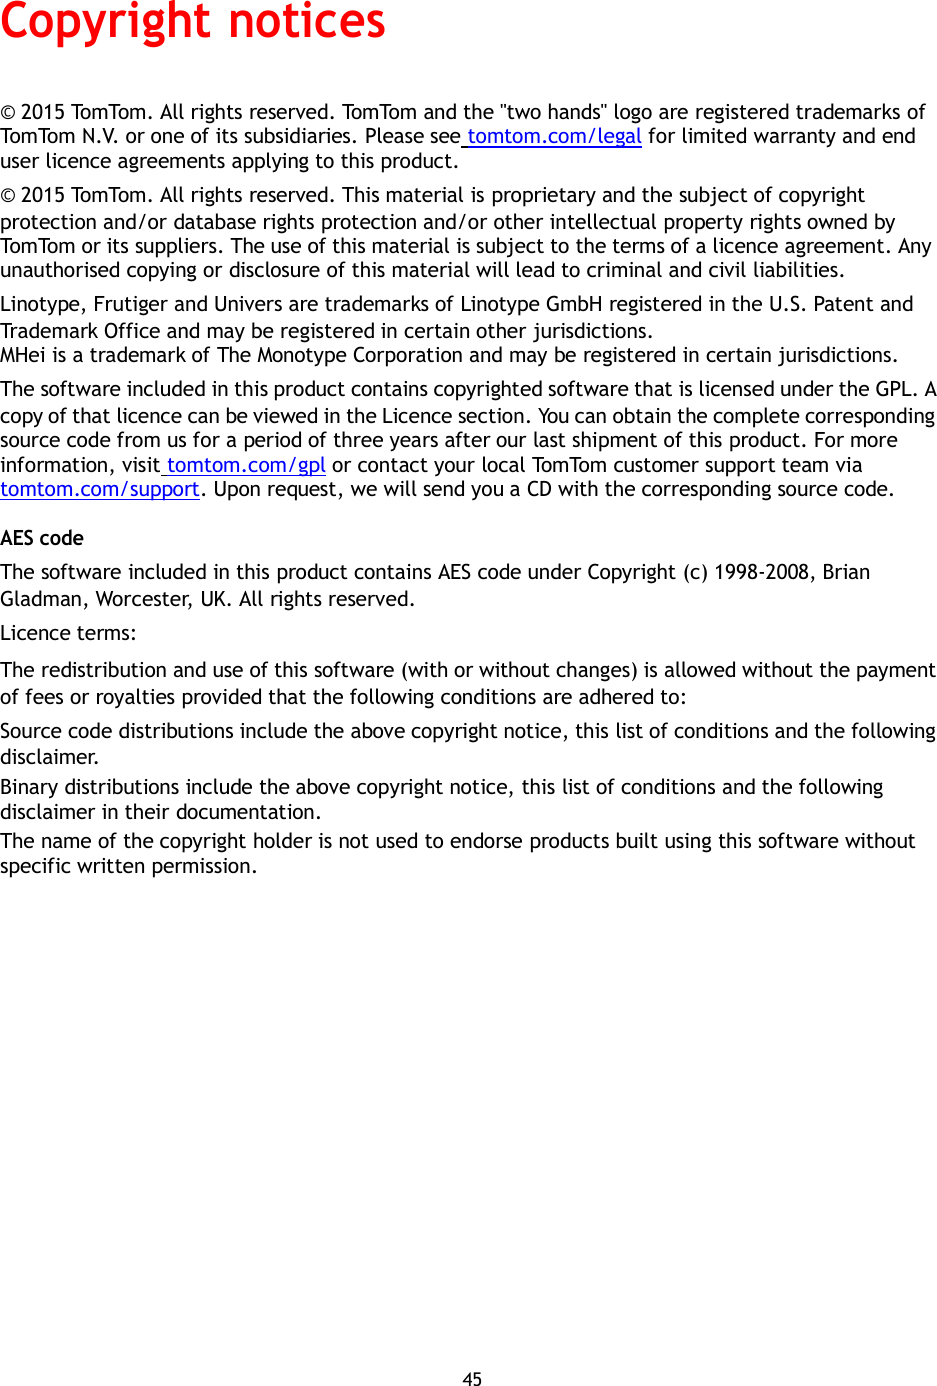   Copyright notices   © 2015 TomTom. All rights reserved. TomTom and the &quot;two hands&quot; logo are registered trademarks of TomTom N.V. or one of its subsidiaries. Please see tomtom.com/legal for limited warranty and end user licence agreements applying to this product. © 2015 TomTom. All rights reserved. This material is proprietary and the subject of copyright protection and/or database rights protection and/or other intellectual property rights owned by TomTom or its suppliers. The use of this material is subject to the terms of a licence agreement. Any unauthorised copying or disclosure of this material will lead to criminal and civil liabilities. Linotype, Frutiger and Univers are trademarks of Linotype GmbH registered in the U.S. Patent and Trademark Office and may be registered in certain other jurisdictions. MHei is a trademark of The Monotype Corporation and may be registered in certain jurisdictions. The software included in this product contains copyrighted software that is licensed under the GPL. A copy of that licence can be viewed in the Licence section. You can obtain the complete corresponding source code from us for a period of three years after our last shipment of this product. For more information, visit tomtom.com/gpl or contact your local TomTom customer support team via tomtom.com/support. Upon request, we will send you a CD with the corresponding source code.  AES code The software included in this product contains AES code under Copyright (c) 1998-2008, Brian Gladman, Worcester, UK. All rights reserved. Licence terms: The redistribution and use of this software (with or without changes) is allowed without the payment of fees or royalties provided that the following conditions are adhered to: Source code distributions include the above copyright notice, this list of conditions and the following disclaimer. Binary distributions include the above copyright notice, this list of conditions and the following disclaimer in their documentation. The name of the copyright holder is not used to endorse products built using this software without specific written permission.                    45 